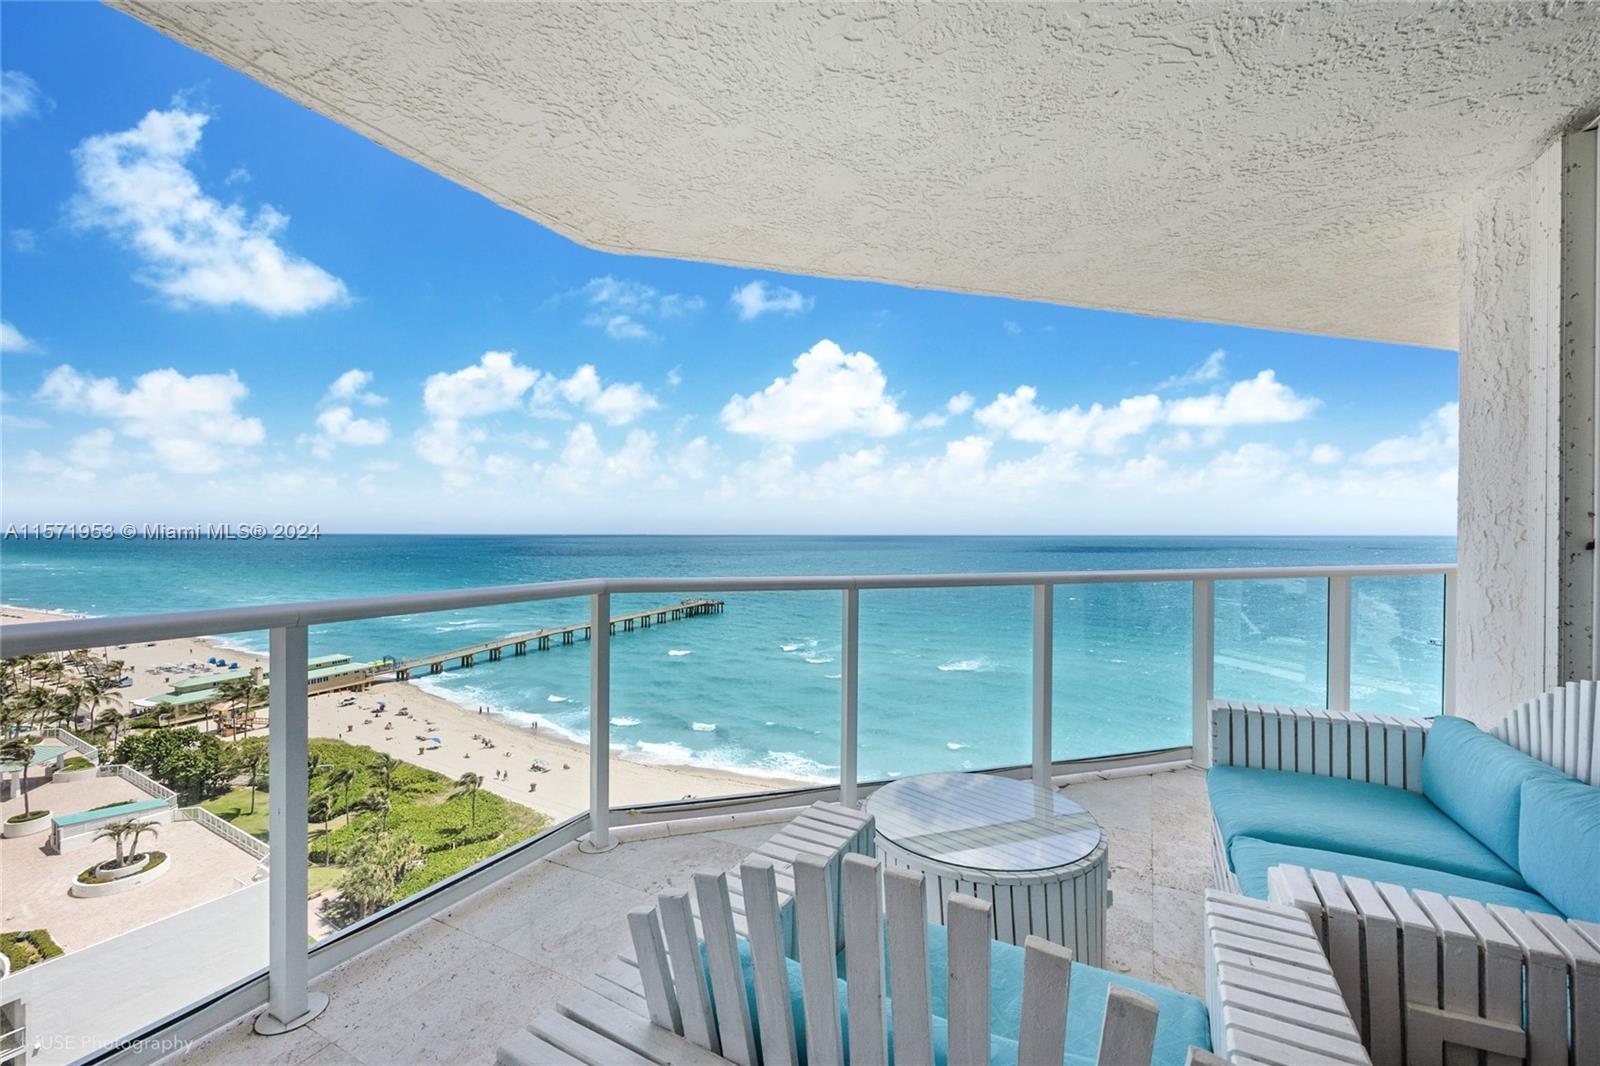 This stunning direct oceanfront residence boasts over 2,020 interior square feet and 374 square feet of open, wrap-around balcony.  The spacious open floor plan, complete with built in bar, will give you, your family and friends endless hours of peaceful enjoyment.   Timeless classic Saturnia marble floors, smooth plaster ceilings and architectural details make this home move-in ready.  The Oceania community features an amazing health club & spa, full service private beach club, fitness classes, racquetball, 2 oceanfront dining rooms, tennis, marina and more!  Truly a rare opportunity.